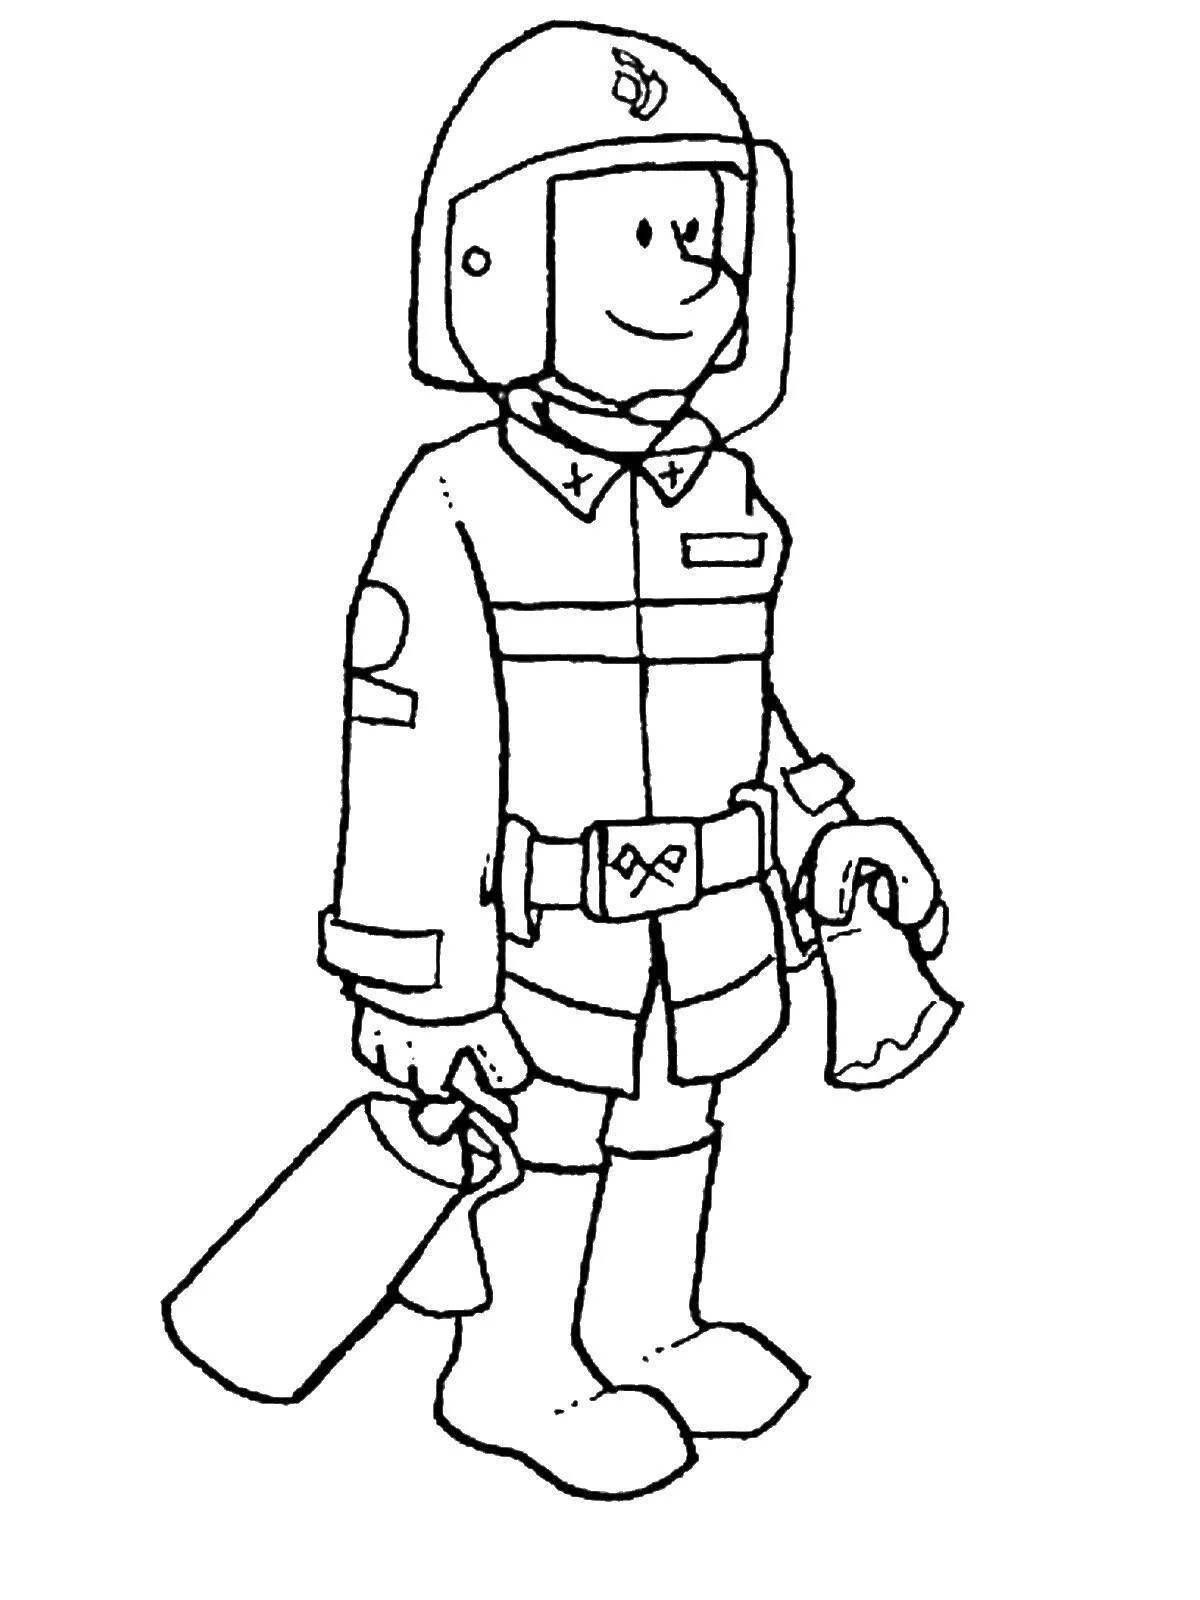 Animated firefighter profession coloring page